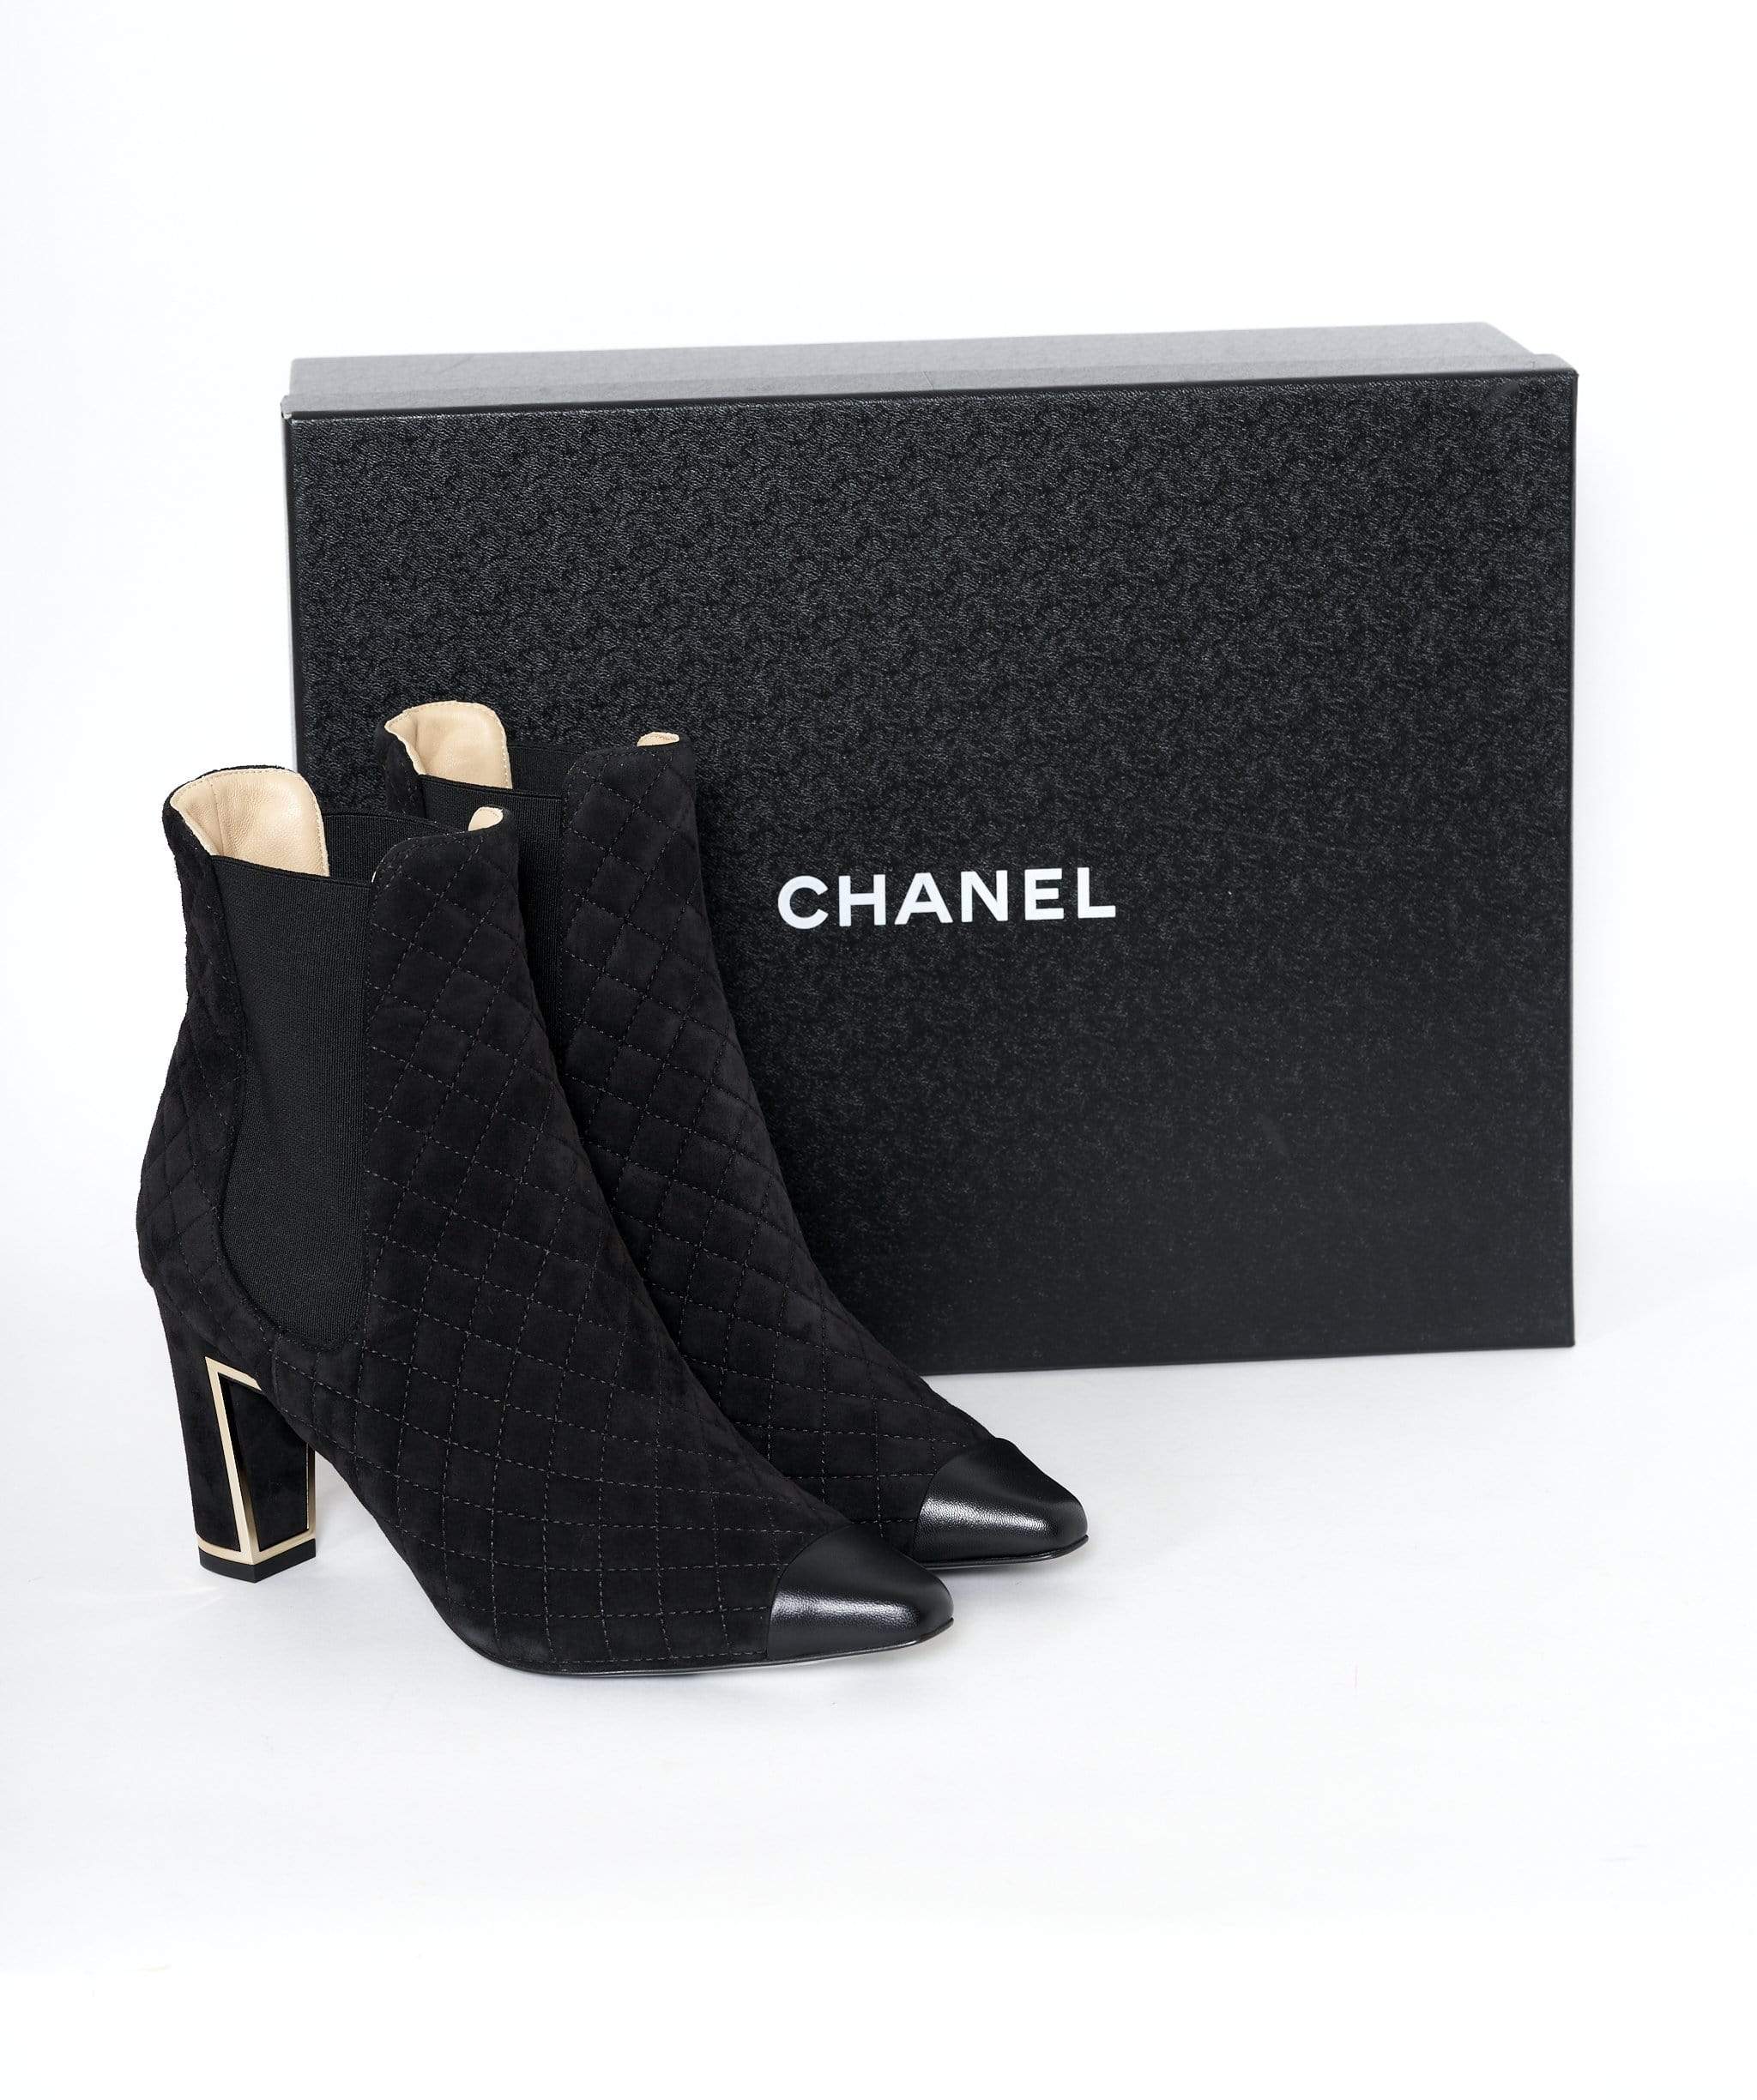 Chanel Chanel suede quilted boots size 39